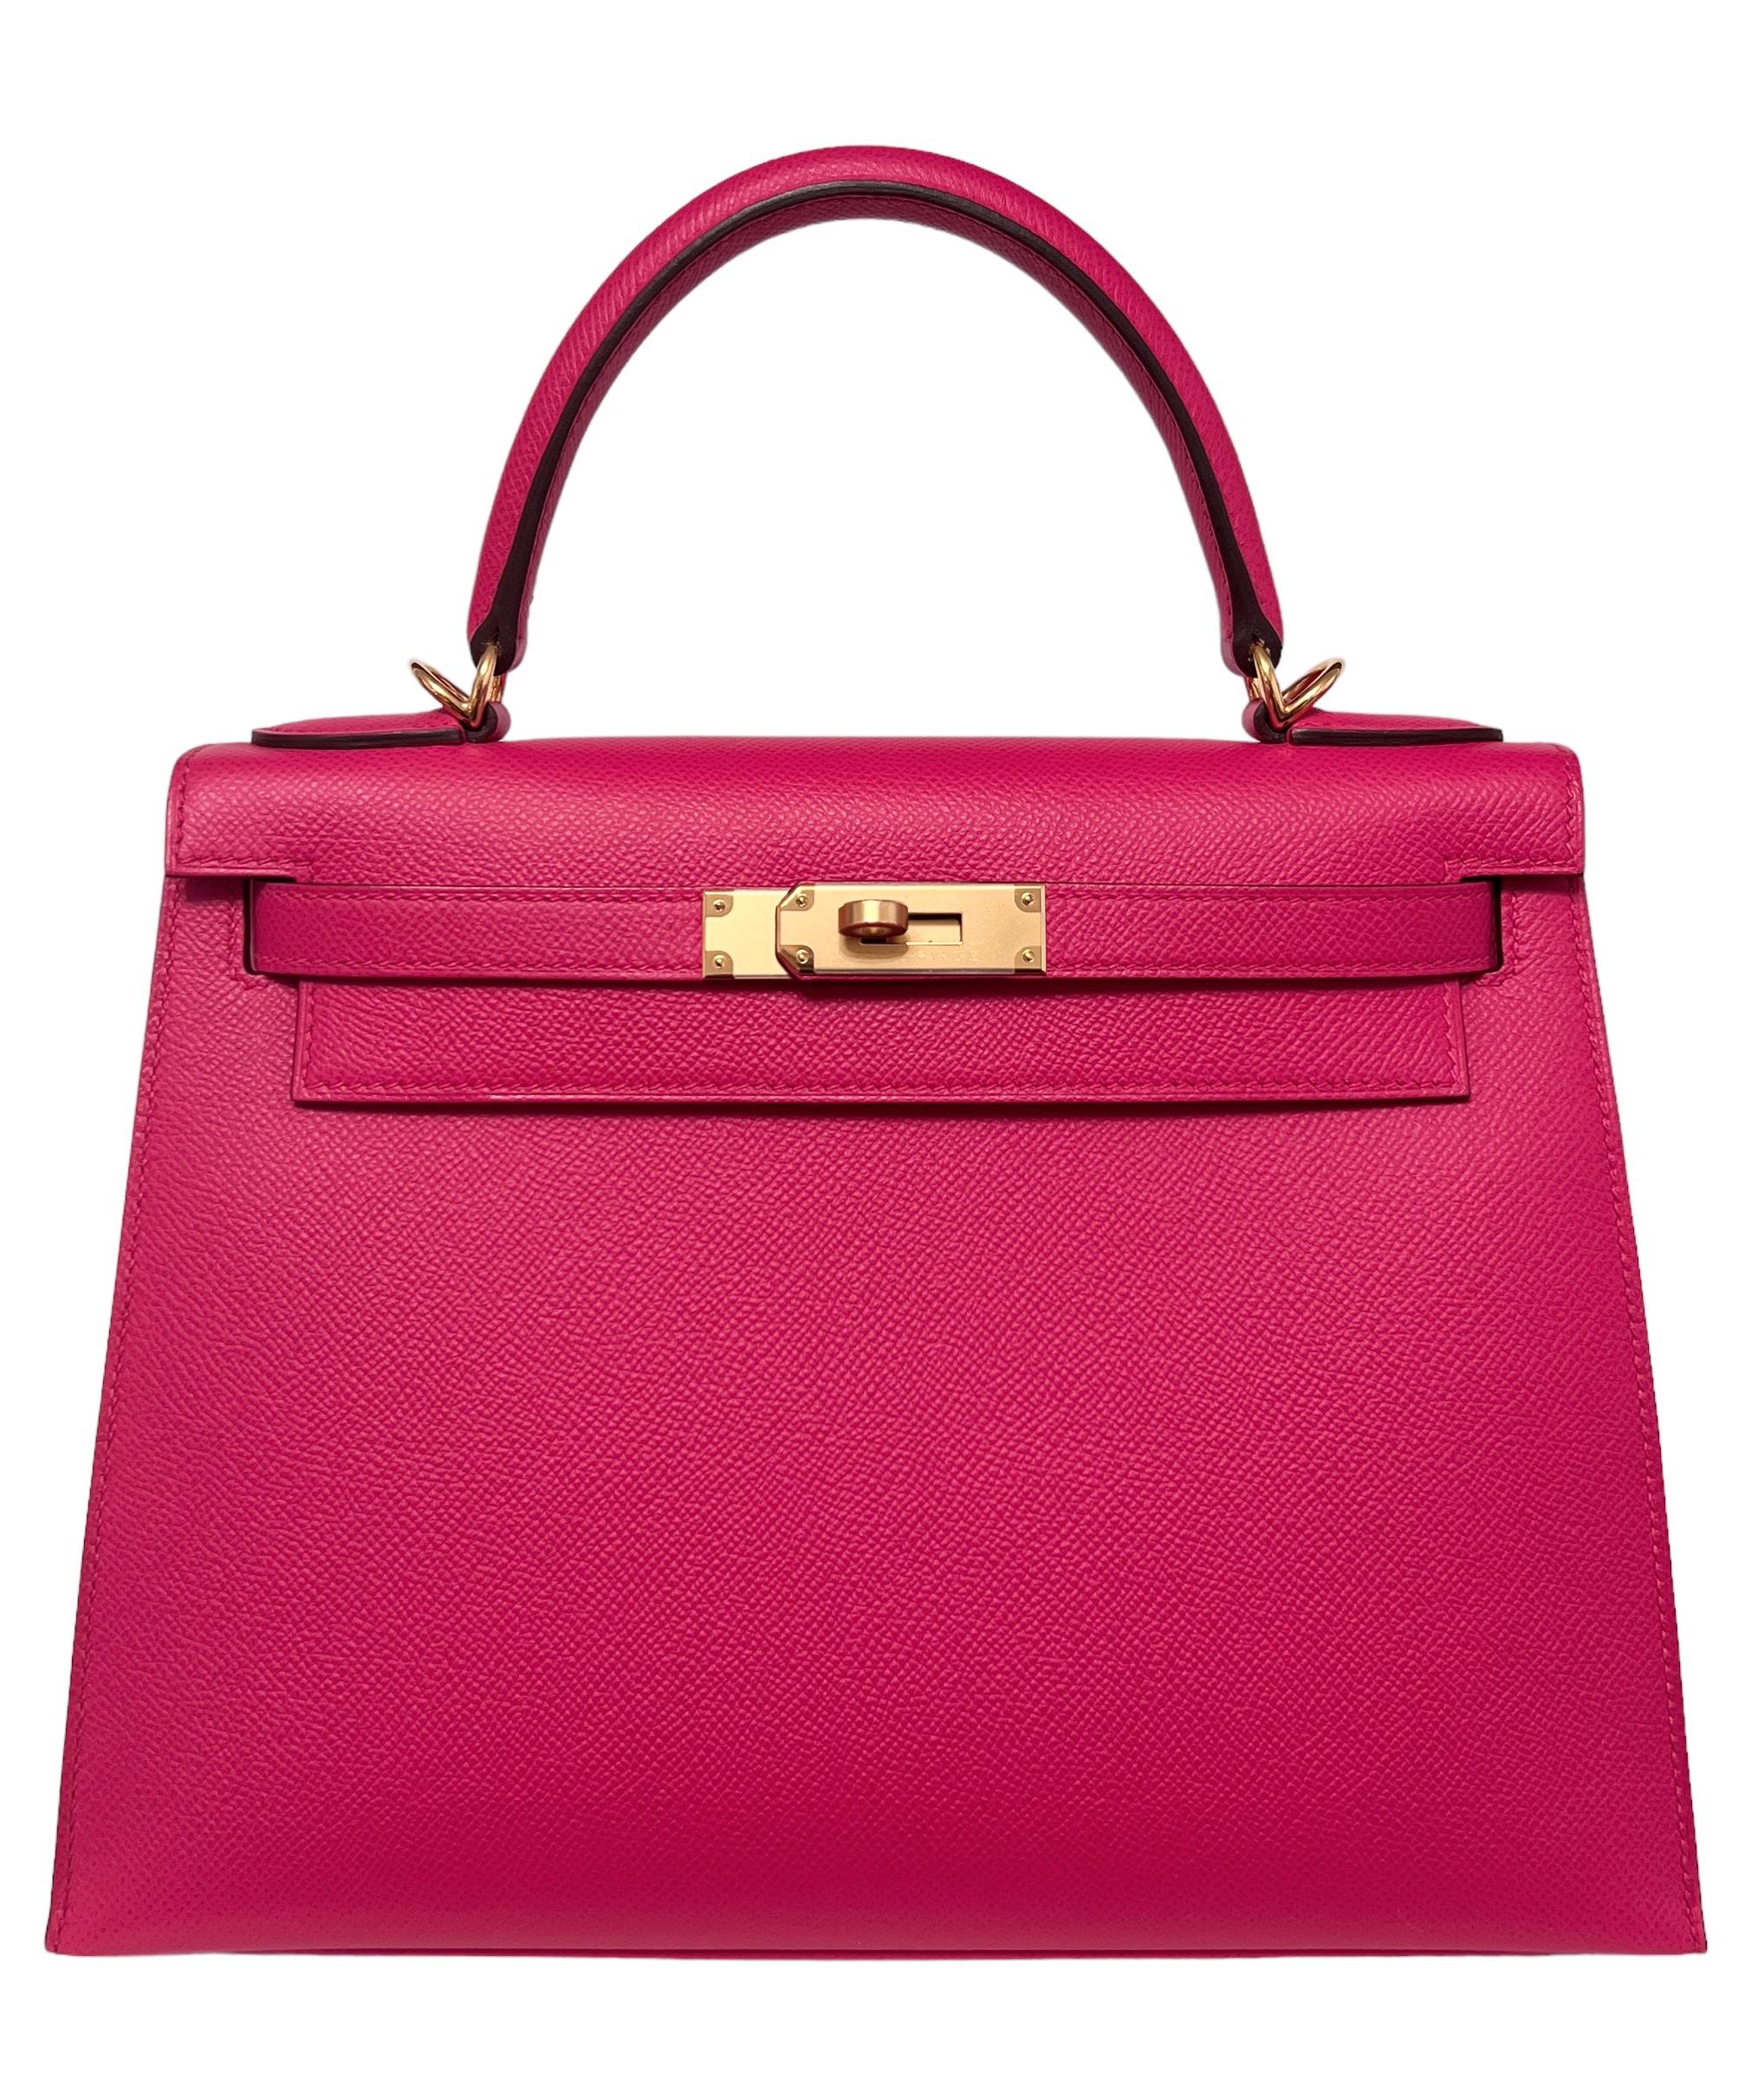 Absolutely Stunning Rare As New Hermes Kelly 28 Sellier Rose Extreme Pink Epsom Leather complimented by Gold Hardware. As New with Plastic on all hardware and feet. 2019 D Stamp. 

Shop with Confidence from Lux Addicts. Authenticity Guaranteed!